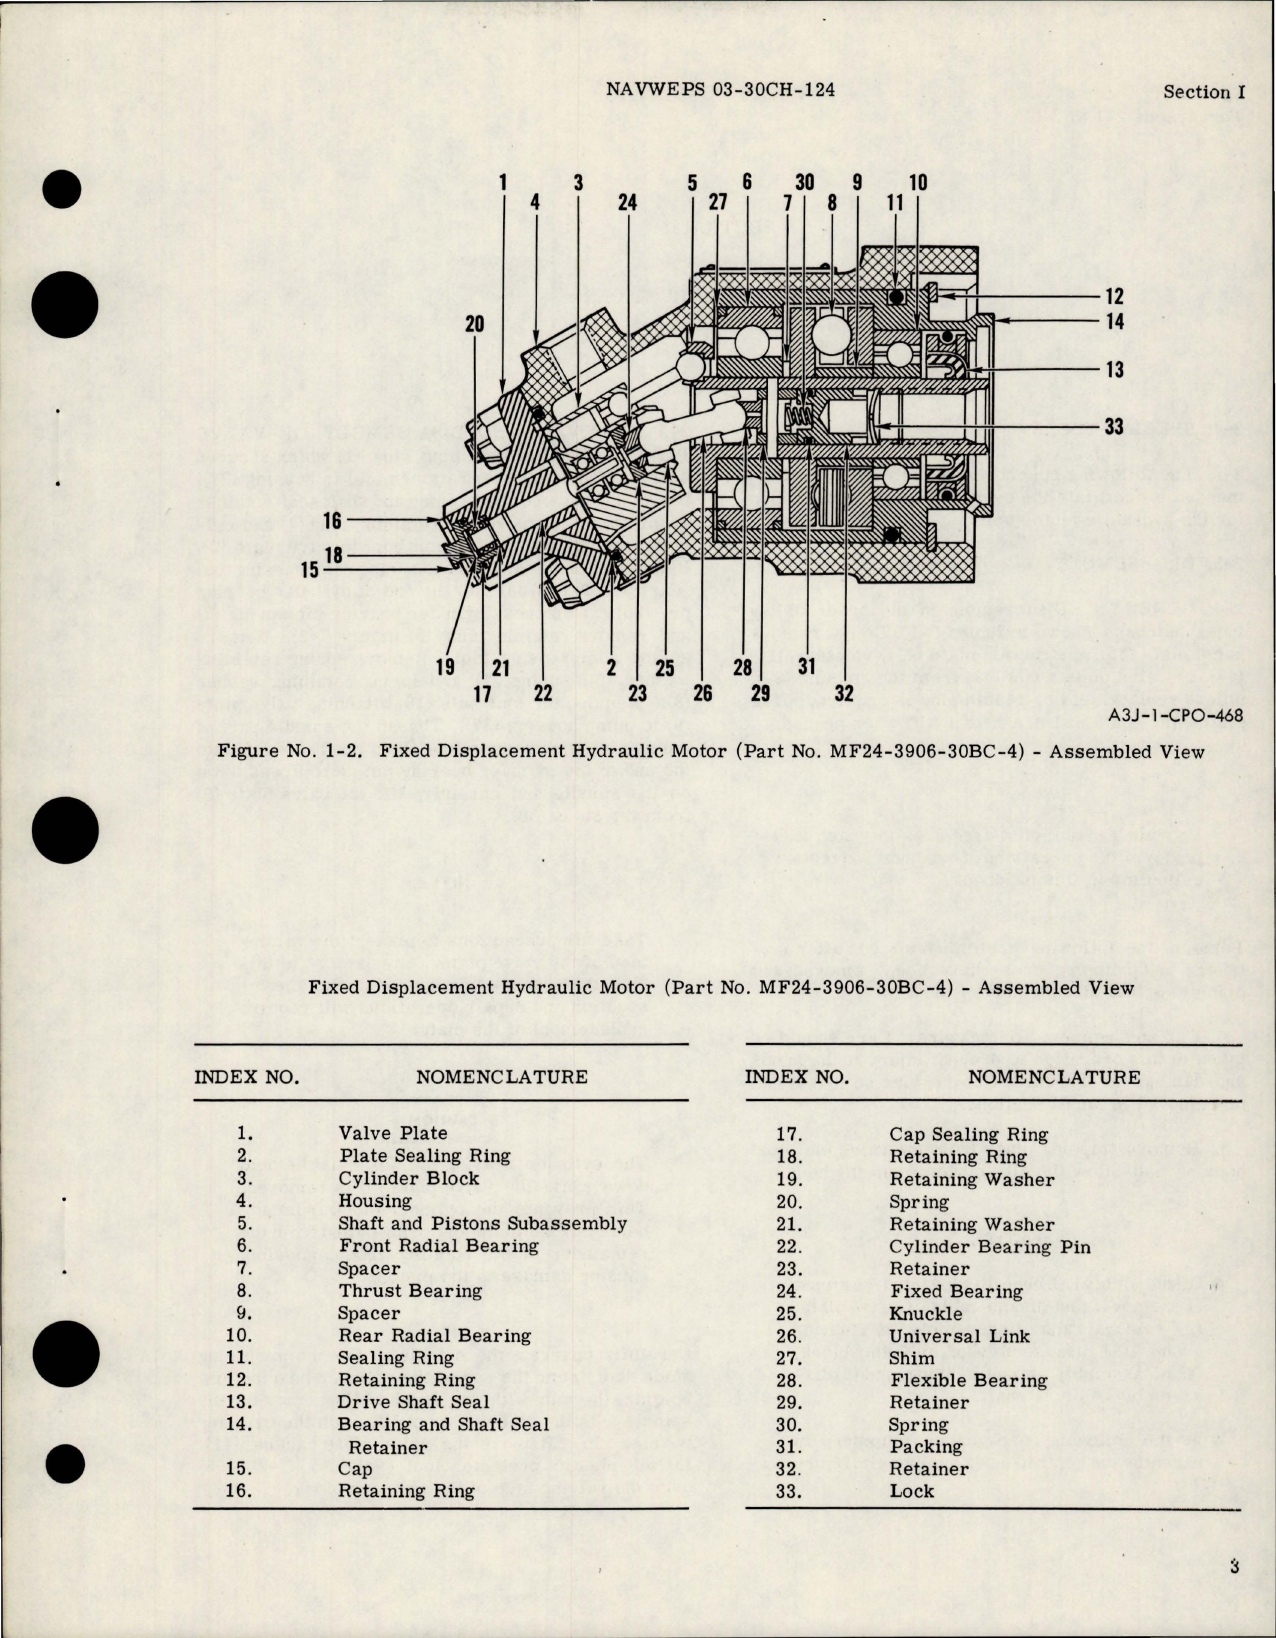 Sample page 5 from AirCorps Library document: Overhaul Instructions for Hydraulic Motor Assembly - Part MF24-3906-30BC-4 